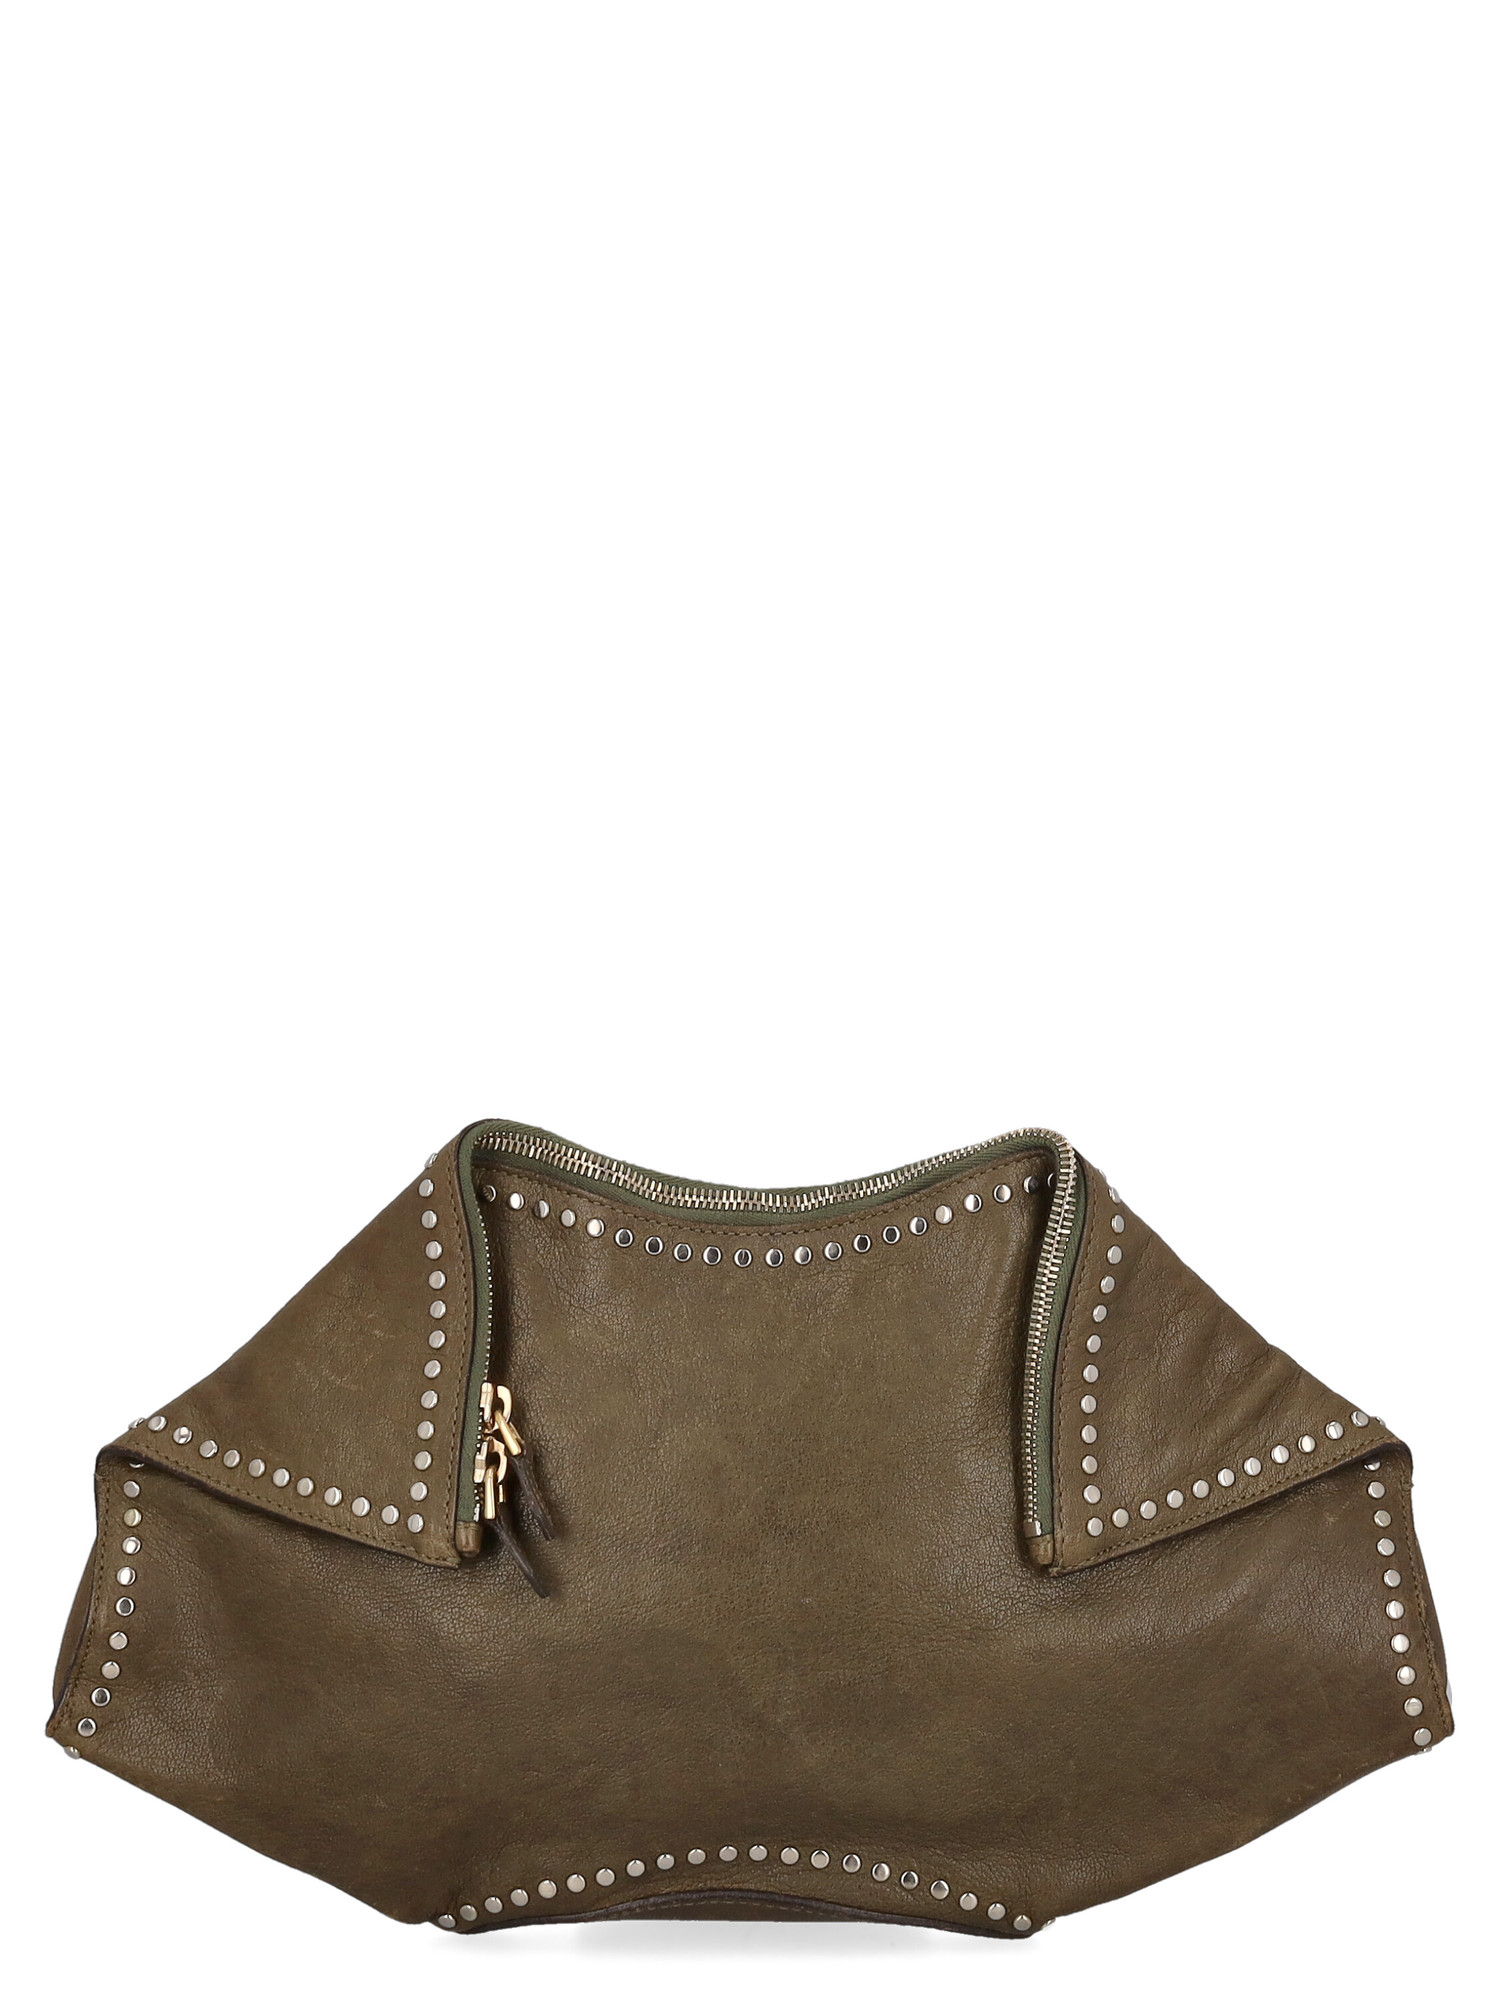 Condition: Good, Solid Color Leather, Color: Khaki -  -  -